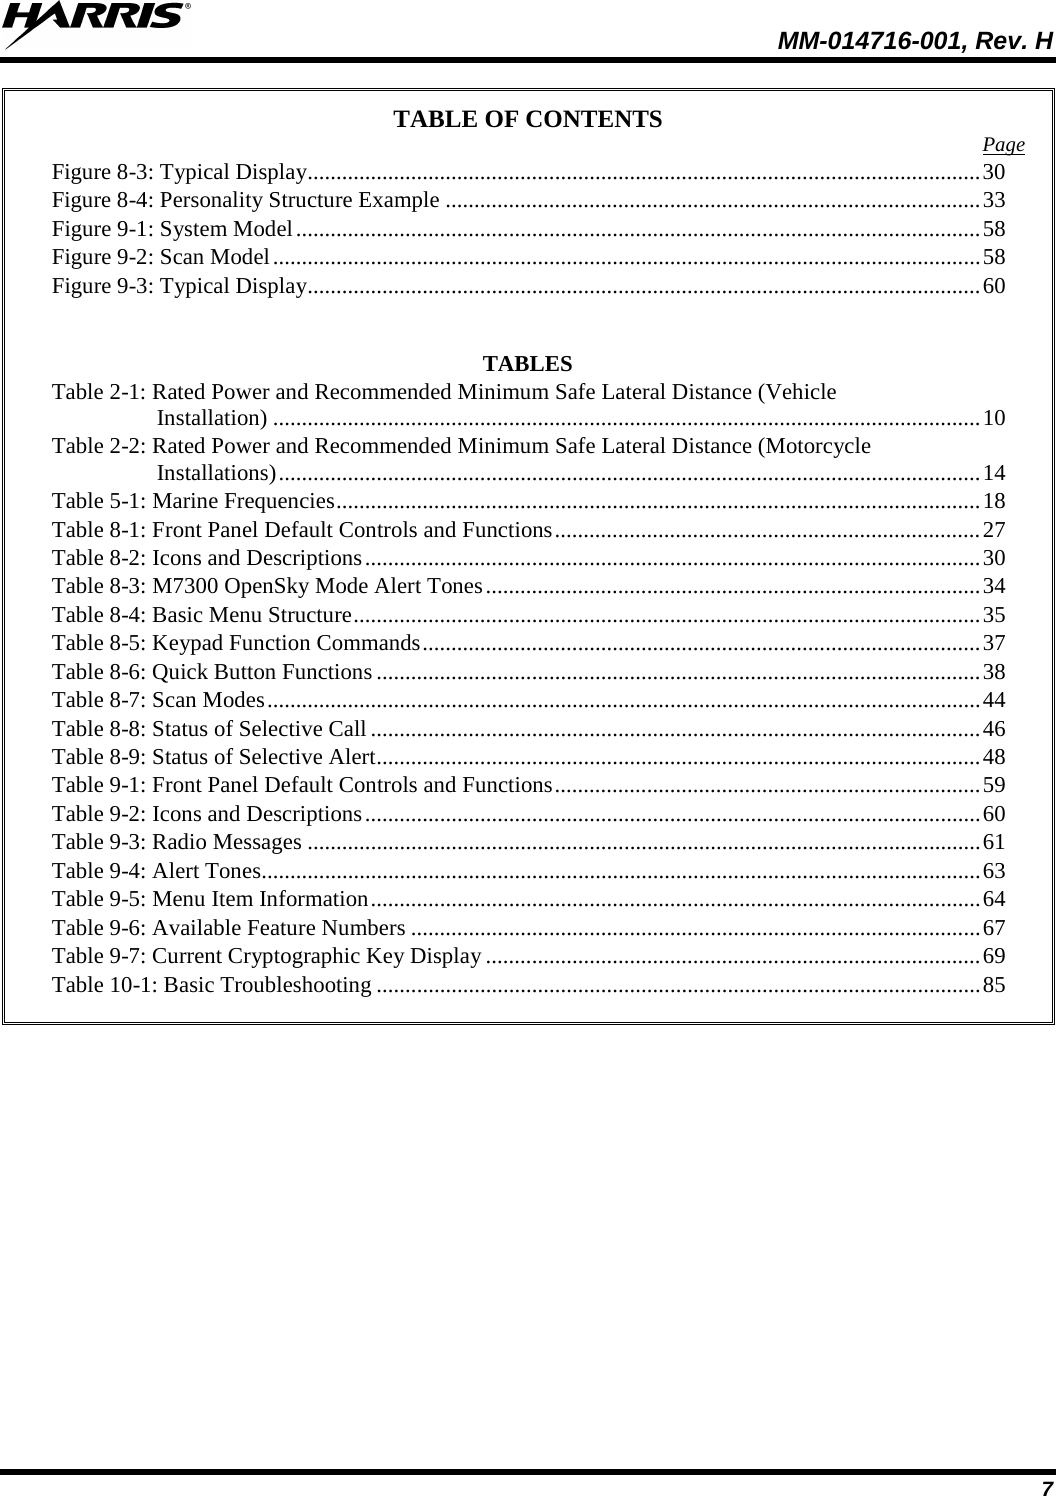  MM-014716-001, Rev. H 7 TABLE OF CONTENTS Page Figure 8-3: Typical Display ..................................................................................................................... 30 Figure 8-4: Personality Structure Example ............................................................................................. 33 Figure 9-1: System Model ....................................................................................................................... 58 Figure 9-2: Scan Model ........................................................................................................................... 58 Figure 9-3: Typical Display ..................................................................................................................... 60   TABLES Table 2-1: Rated Power and Recommended Minimum Safe Lateral Distance (Vehicle Installation) ........................................................................................................................... 10 Table 2-2: Rated Power and Recommended Minimum Safe Lateral Distance (Motorcycle Installations) .......................................................................................................................... 14 Table 5-1: Marine Frequencies ................................................................................................................ 18 Table 8-1: Front Panel Default Controls and Functions .......................................................................... 27 Table 8-2: Icons and Descriptions ........................................................................................................... 30 Table 8-3: M7300 OpenSky Mode Alert Tones ...................................................................................... 34 Table 8-4: Basic Menu Structure ............................................................................................................. 35 Table 8-5: Keypad Function Commands ................................................................................................. 37 Table 8-6: Quick Button Functions ......................................................................................................... 38 Table 8-7: Scan Modes ............................................................................................................................ 44 Table 8-8: Status of Selective Call .......................................................................................................... 46 Table 8-9: Status of Selective Alert ......................................................................................................... 48 Table 9-1: Front Panel Default Controls and Functions .......................................................................... 59 Table 9-2: Icons and Descriptions ........................................................................................................... 60 Table 9-3: Radio Messages ..................................................................................................................... 61 Table 9-4: Alert Tones............................................................................................................................. 63 Table 9-5: Menu Item Information .......................................................................................................... 64 Table 9-6: Available Feature Numbers ................................................................................................... 67 Table 9-7: Current Cryptographic Key Display ...................................................................................... 69 Table 10-1: Basic Troubleshooting ......................................................................................................... 85  